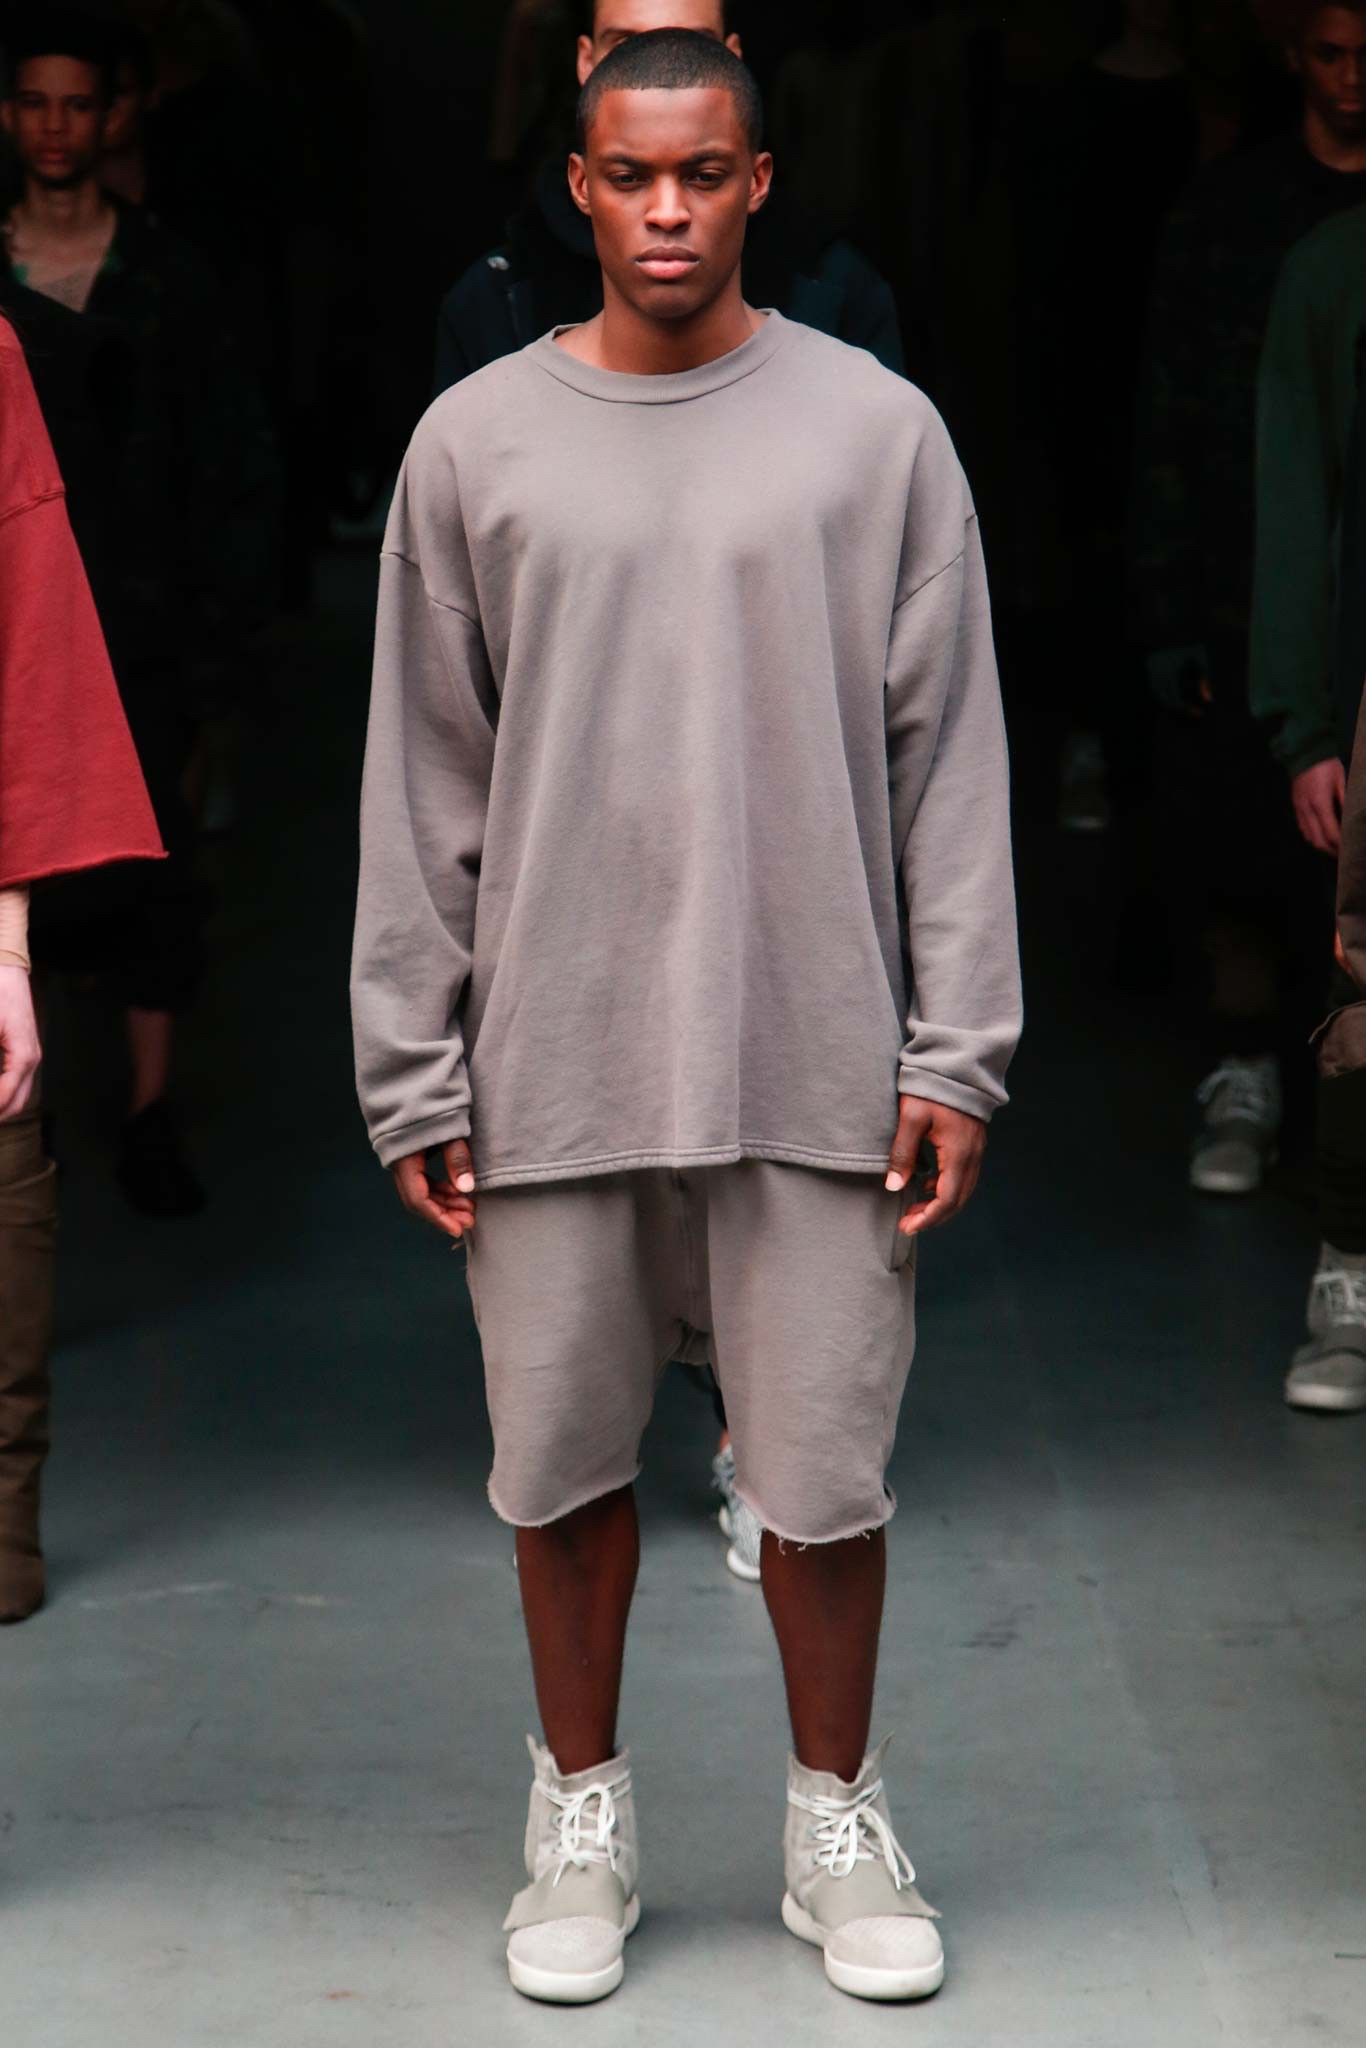 Kanye West Adidas Fall Winter 2015 Mens Collection Photos 011